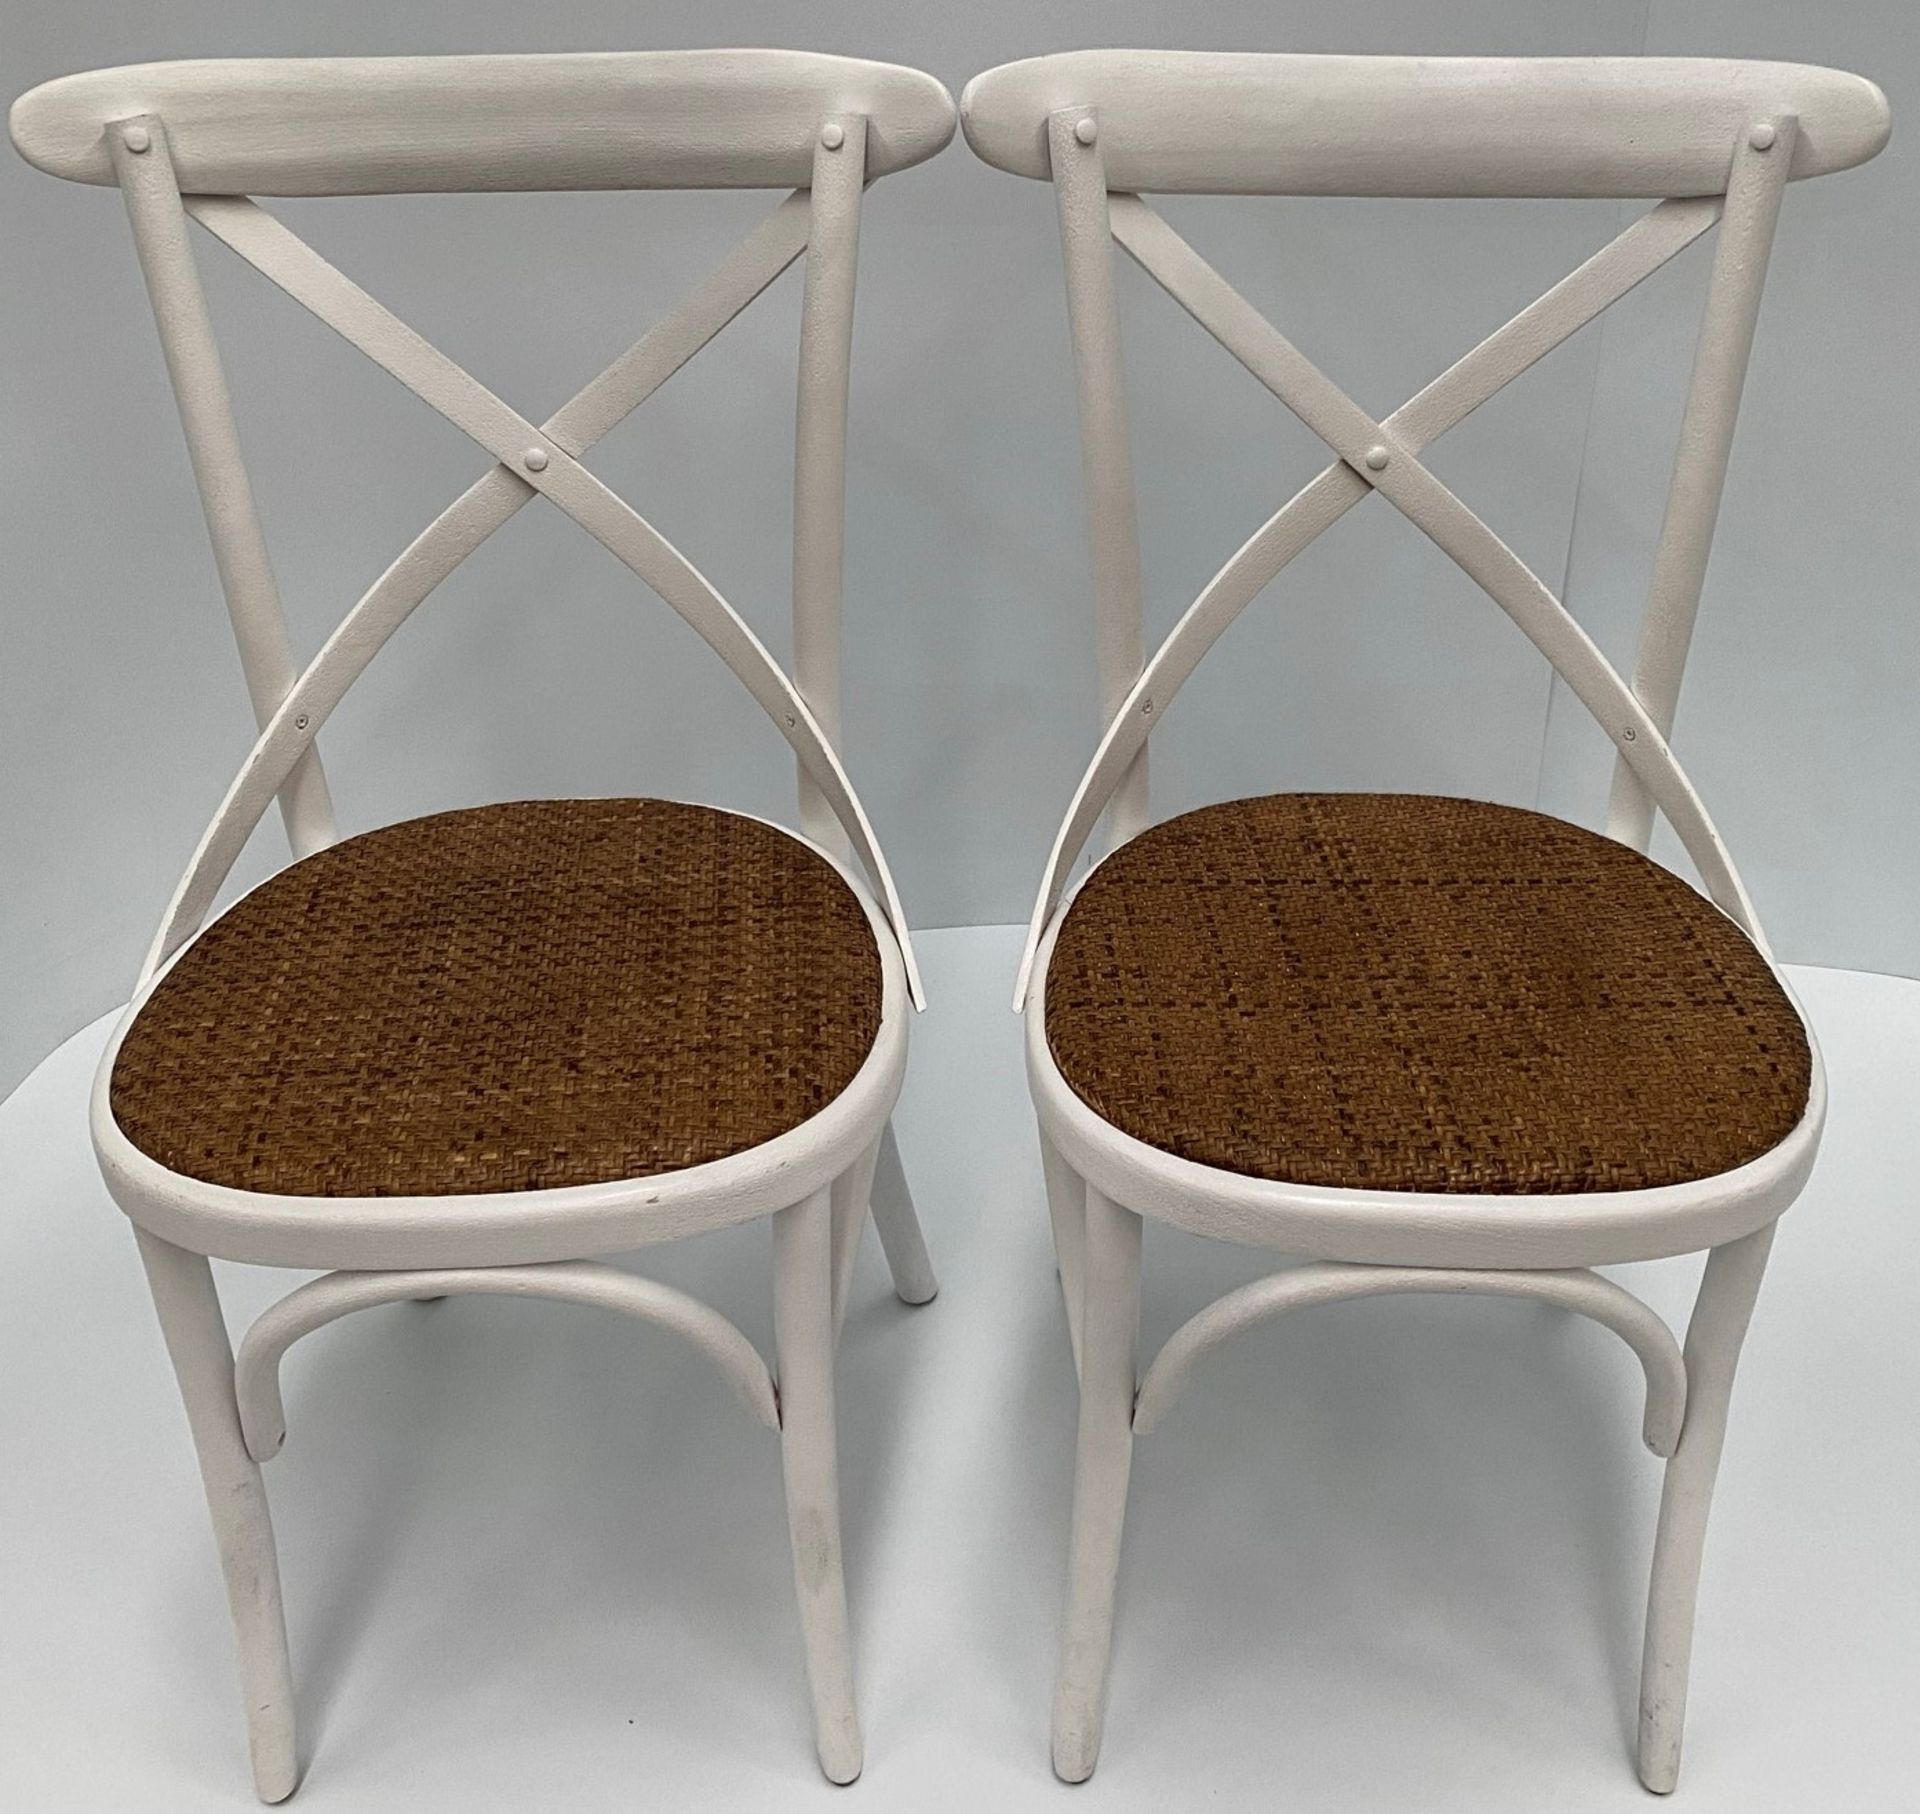 2 x White Palm chairs with hessian seats.